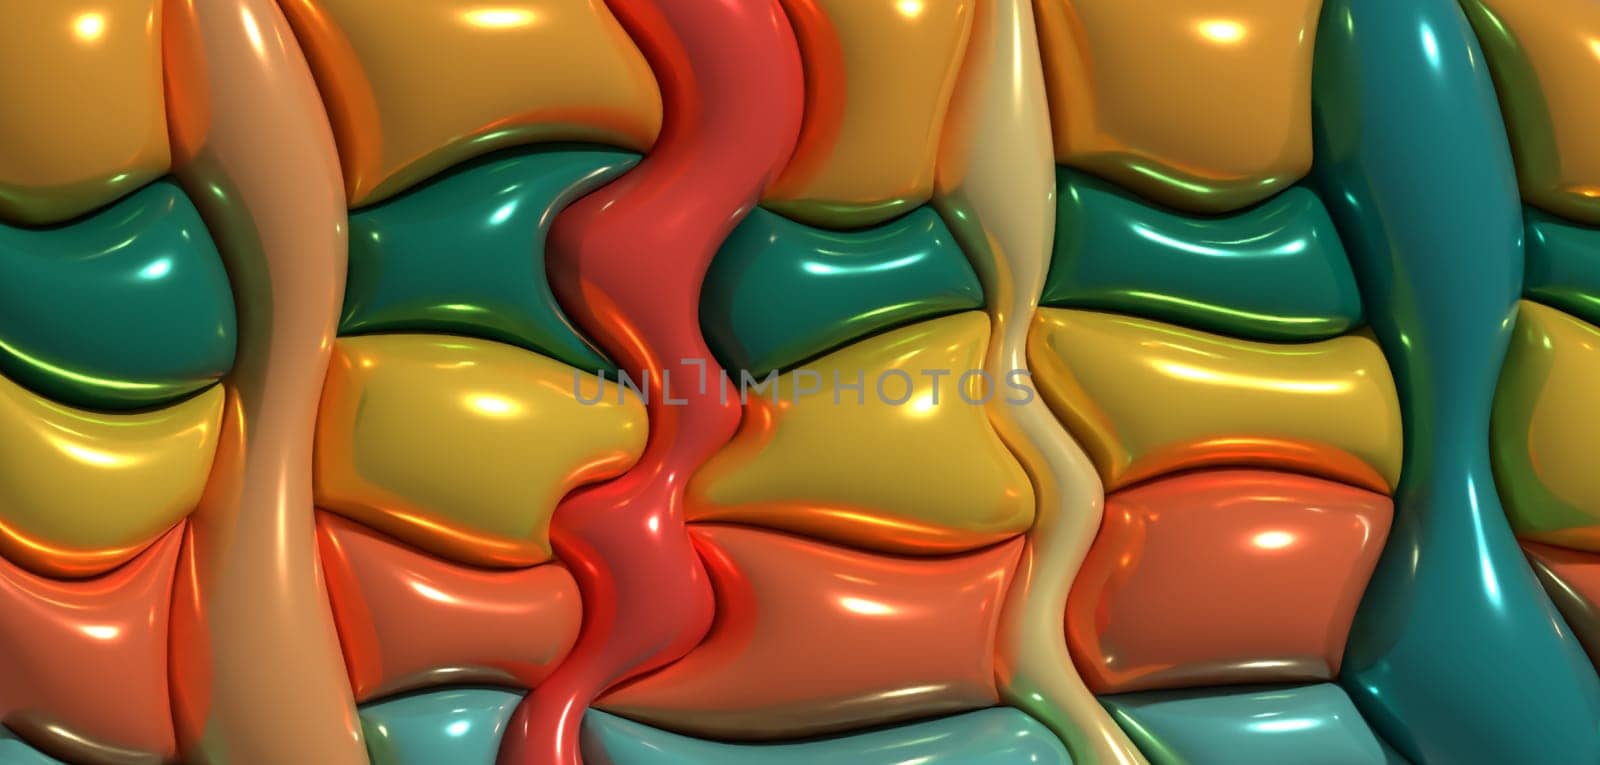 Abstract background with wavy shapes, 3D rendering illustration